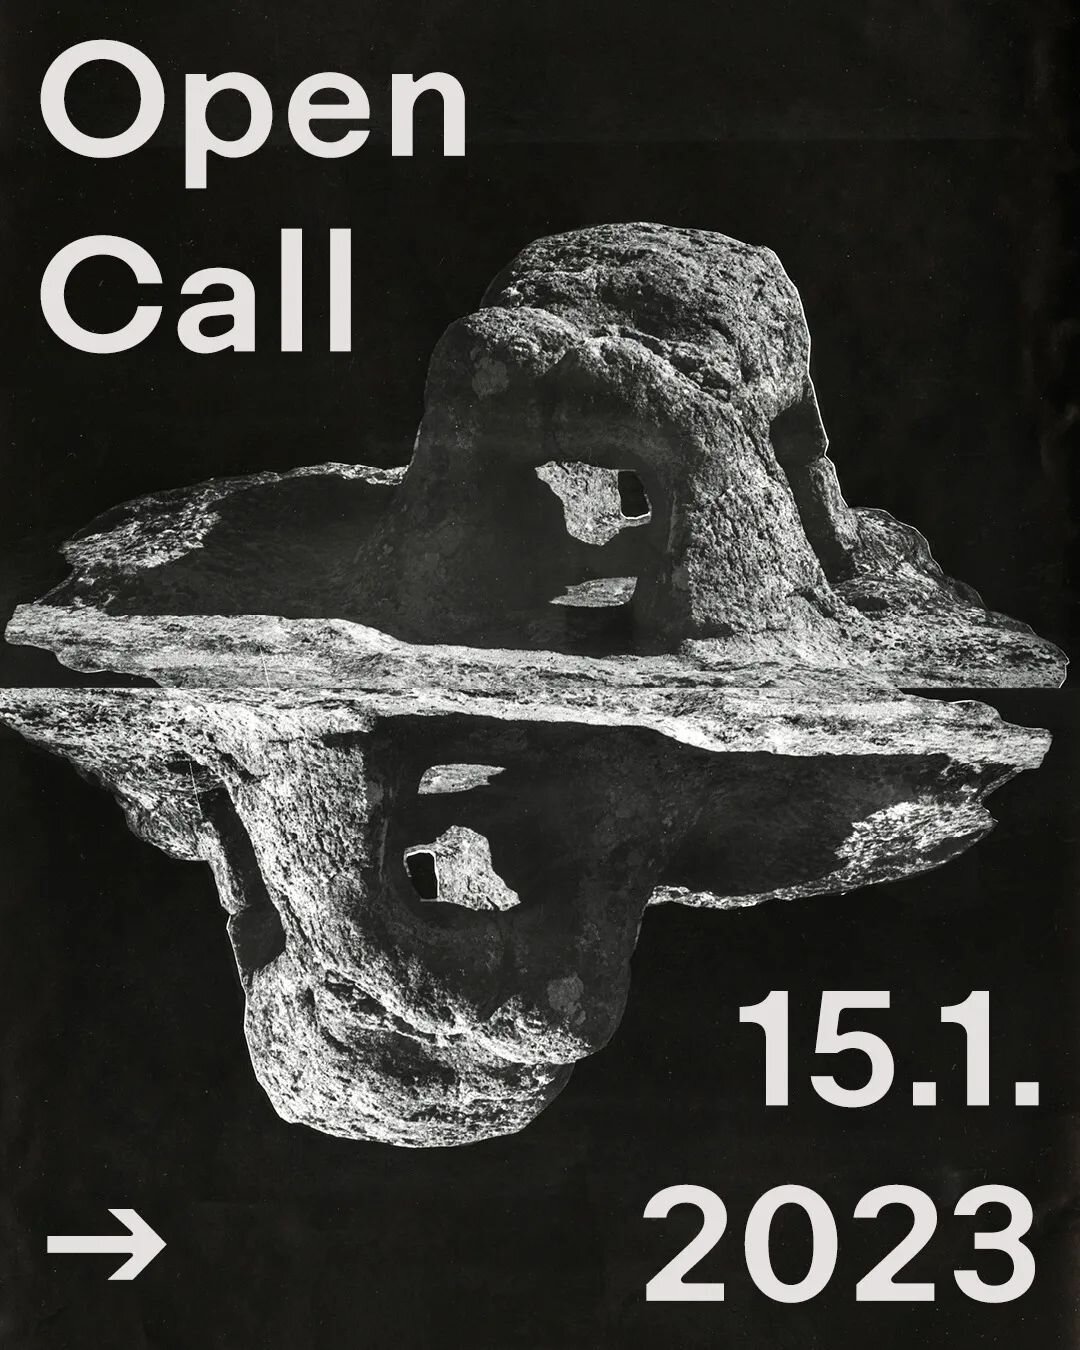 OPEN CALL for the year 2023 is NOW OPEN! 🤗🤗🤗

Open Call is open for all photographers and artists working with analog photography methods living in the Nordic countries: Denmark, Finland, Iceland, Norway and Sweden.

Application deadline is 15.1.2